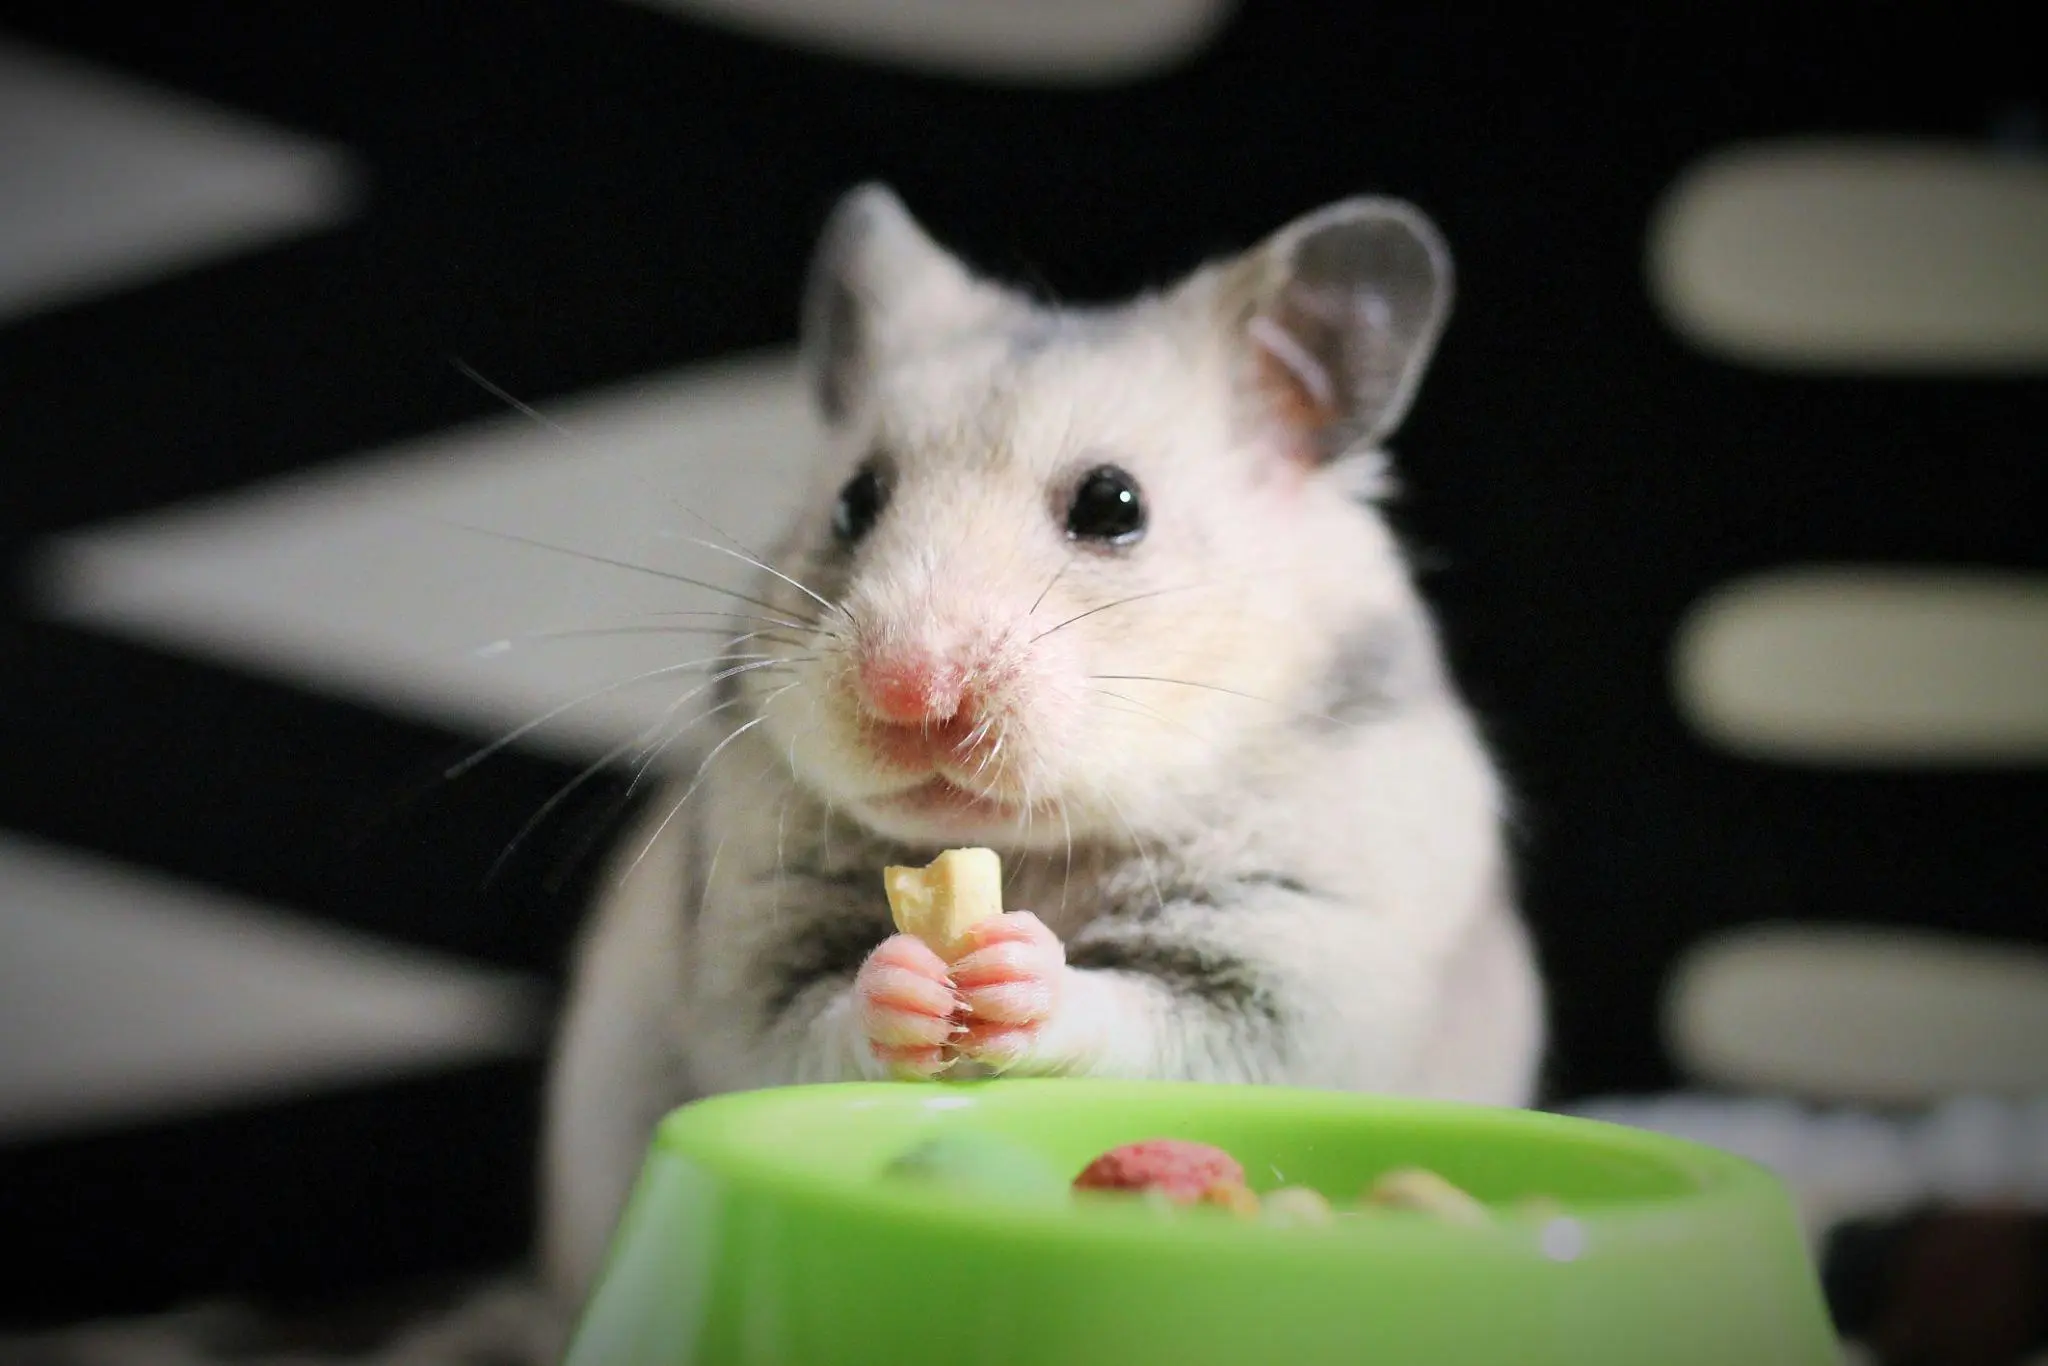 Vet approved foods for hamsters